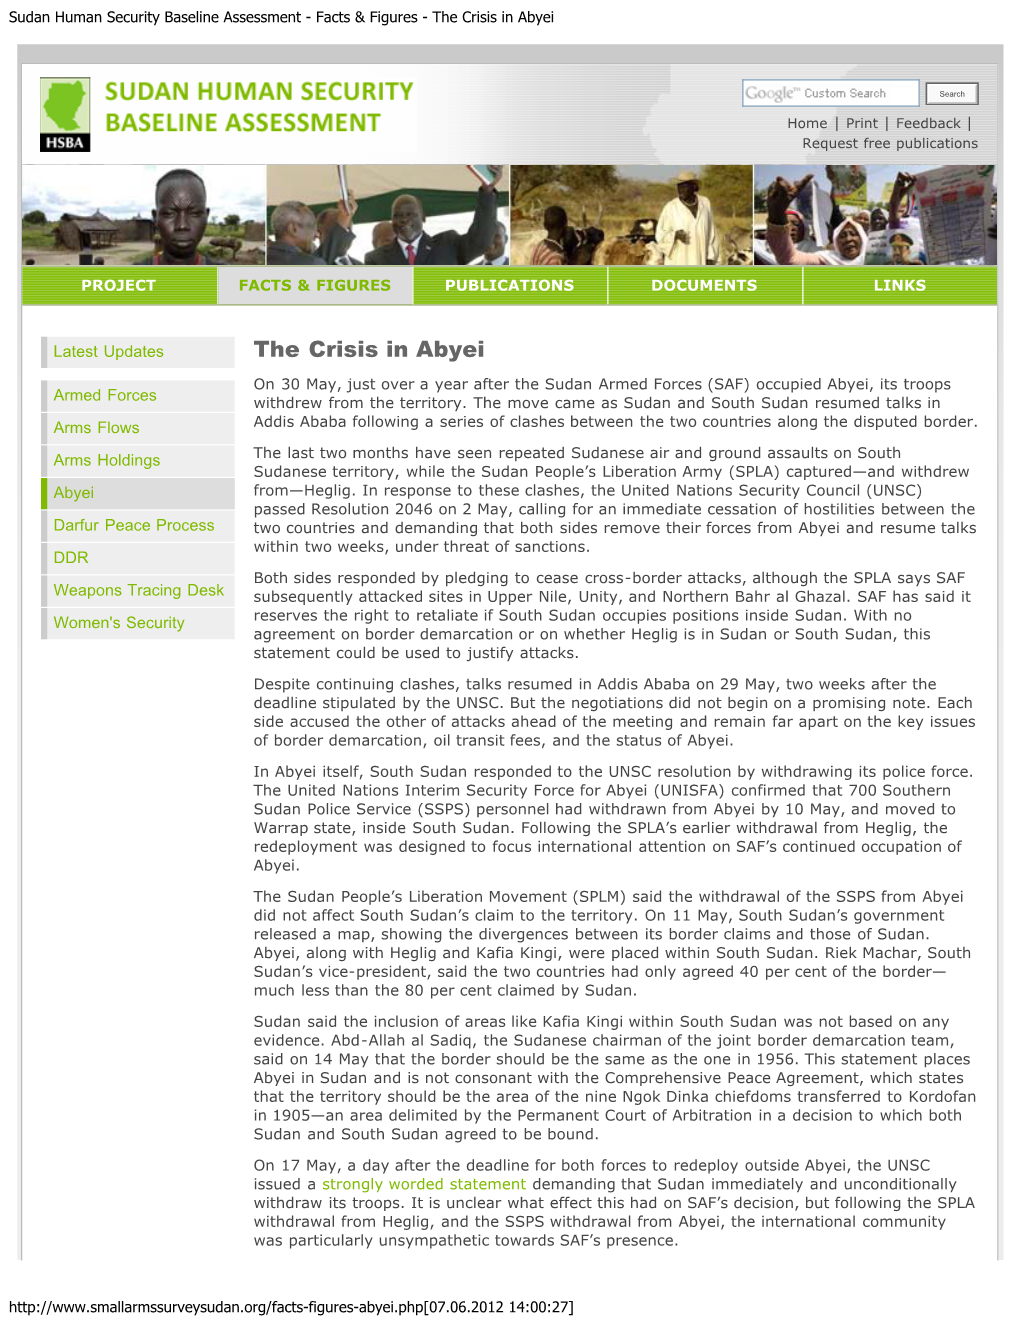 Sudan Human Security Baseline Assessment - Facts & Figures - the Crisis in Abyei